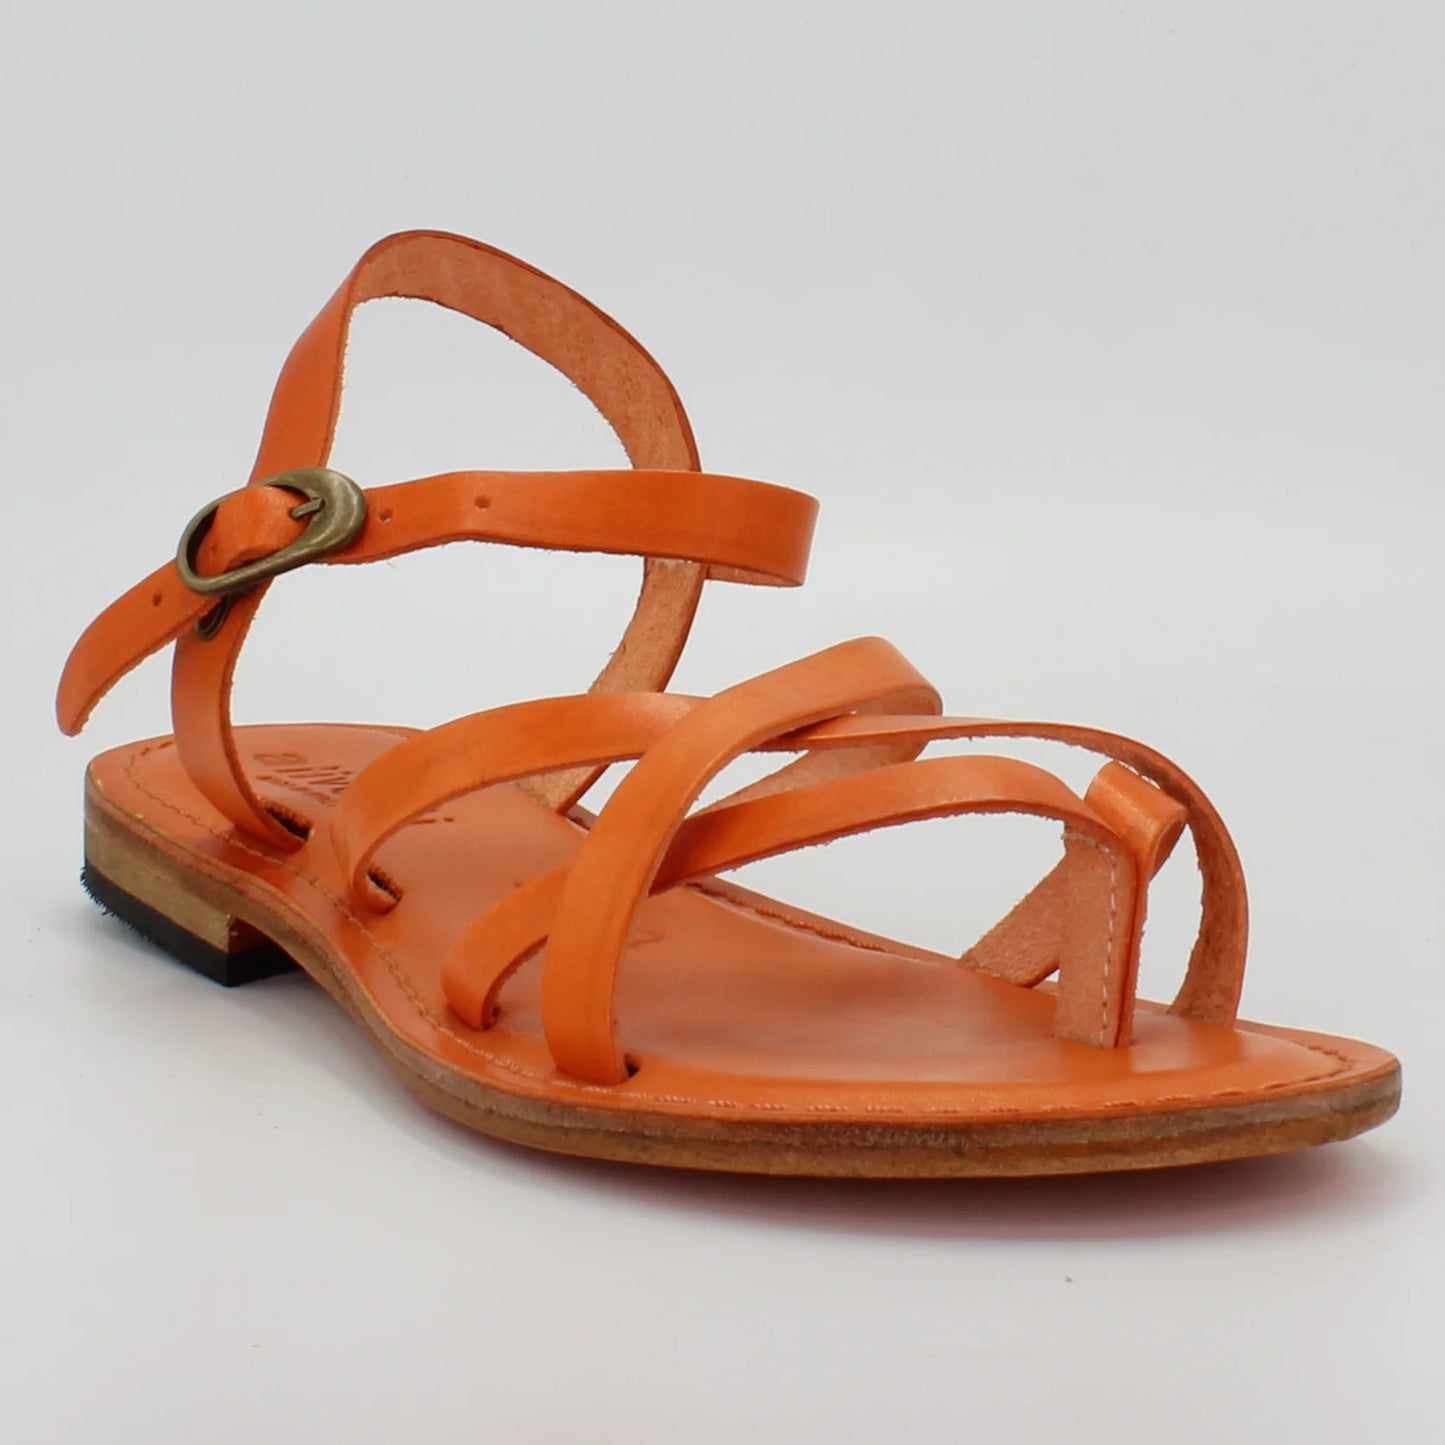 Shop Handmade Italian Leather sandal in arancio (1530) or browse our range of hand-made Italian shoes in leather or suede in-store at Aliverti Cape Town, or shop online. We deliver in South Africa & offer multiple payment plans as well as accept multiple safe & secure payment methods.